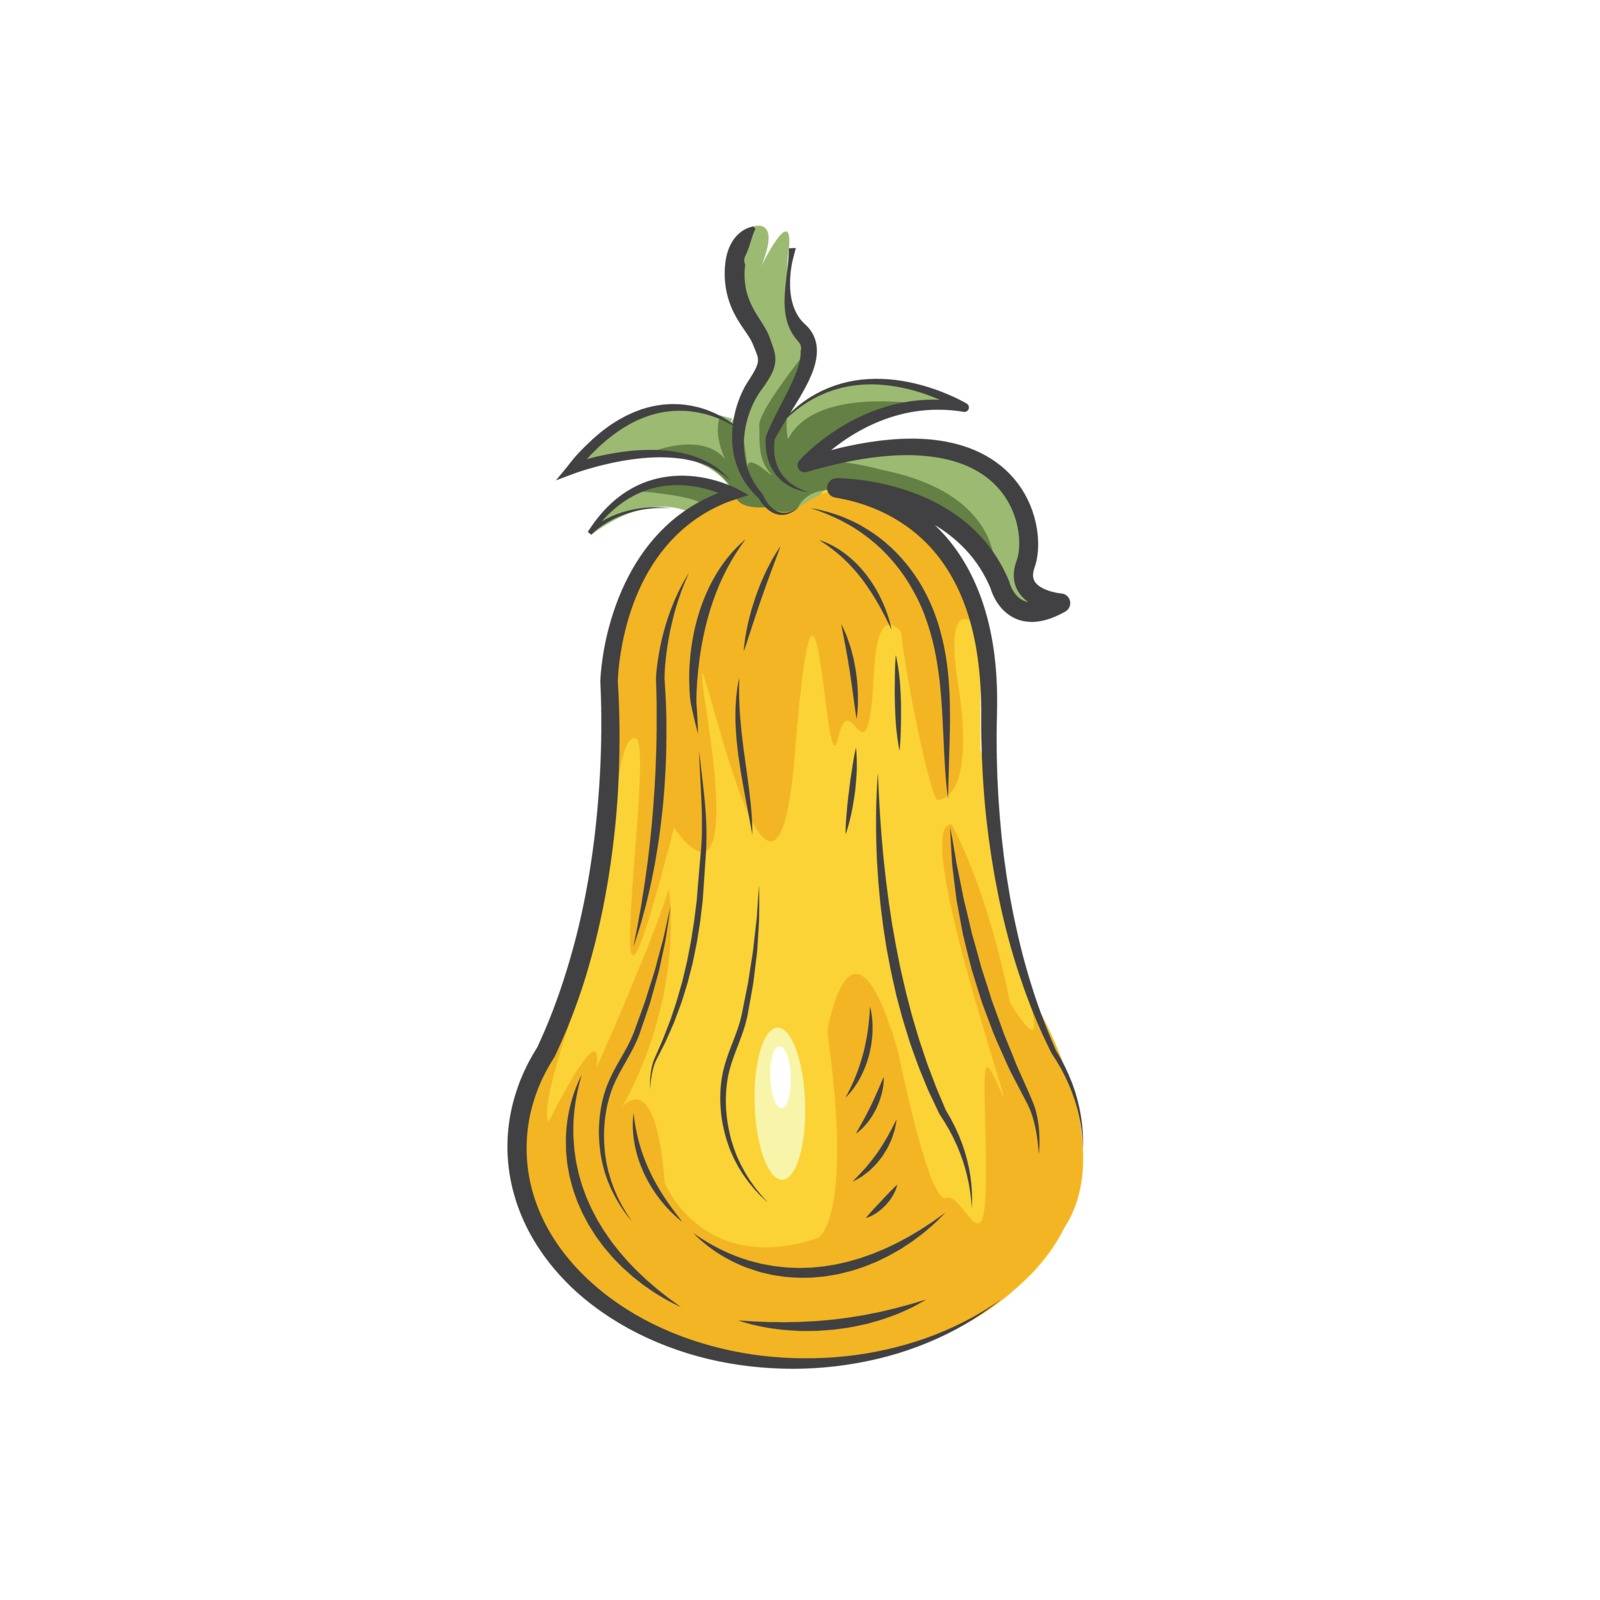 yellow Tomato drawing icon design by barboon